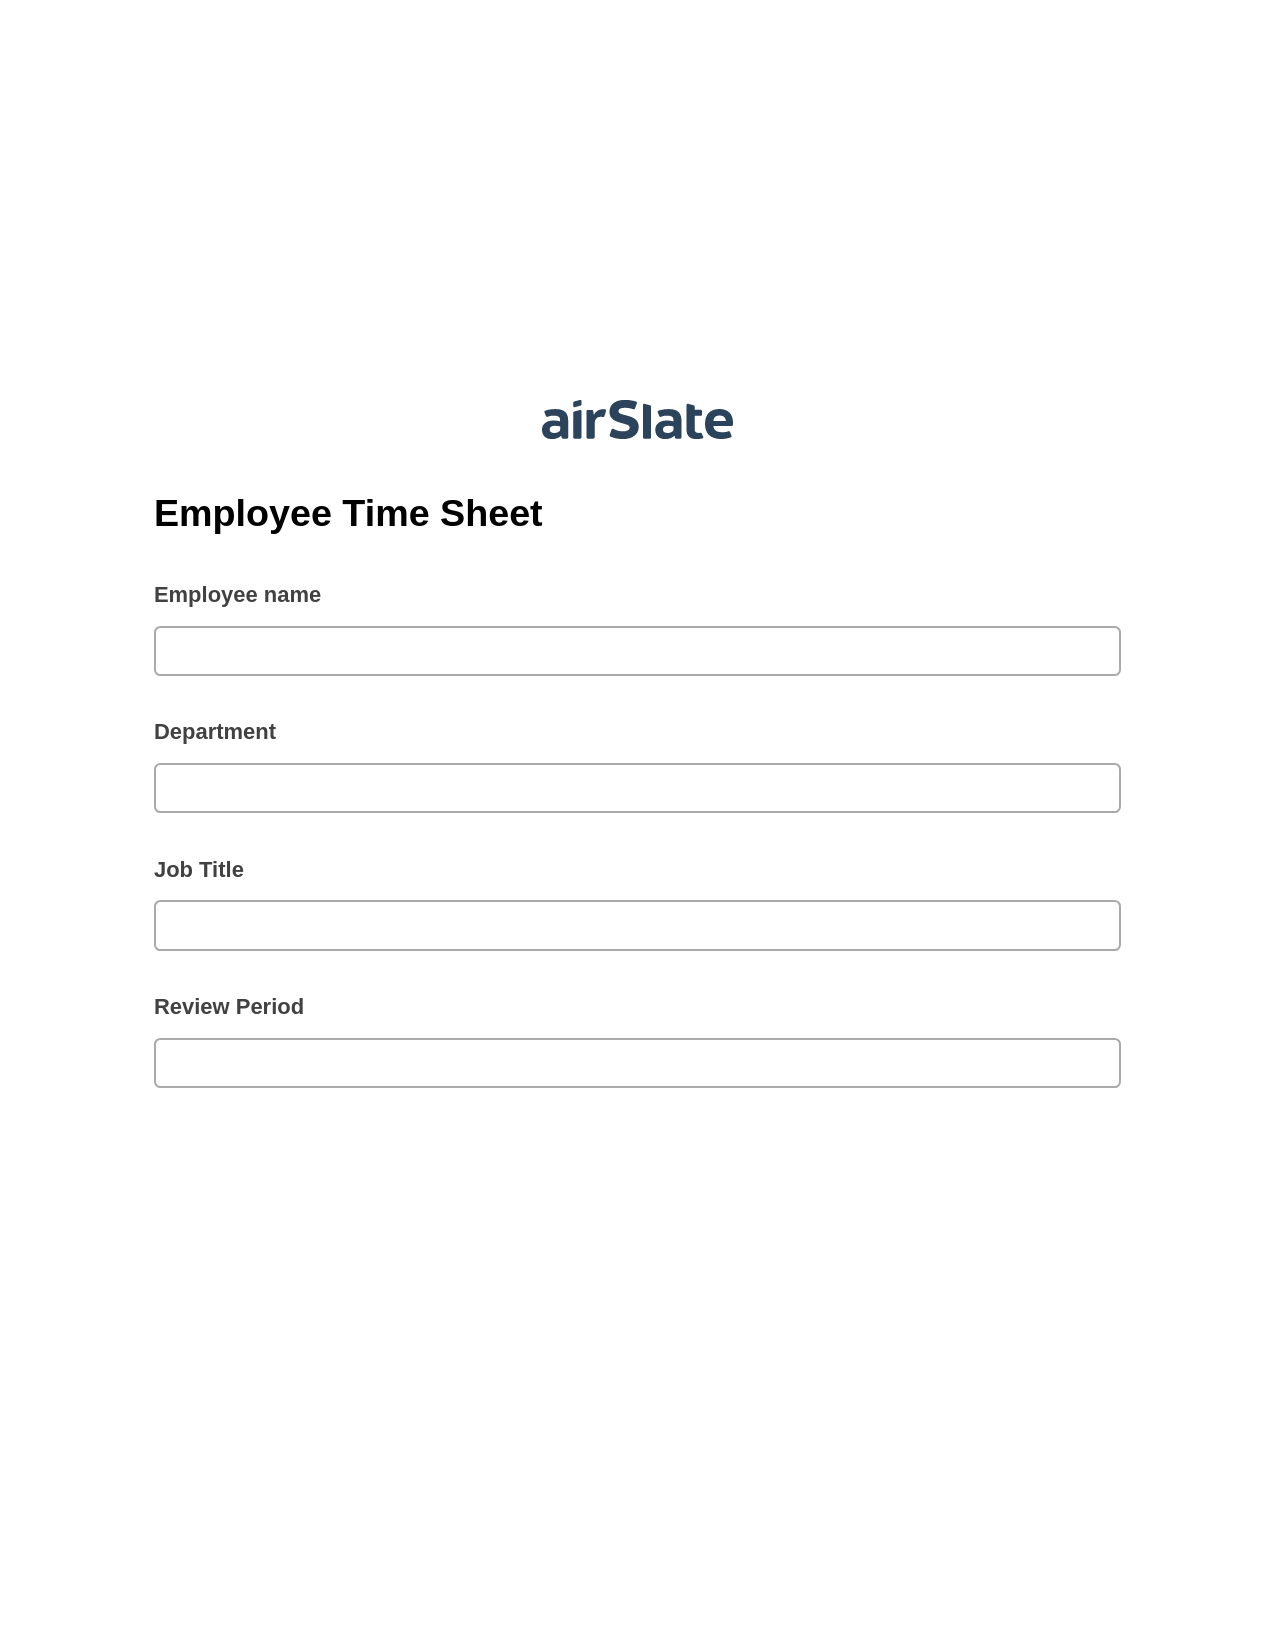 Multirole Employee Time Sheet Pre-fill Dropdowns from CSV file Bot, Mailchimp add recipient to audience Bot, Post-finish Document Bot